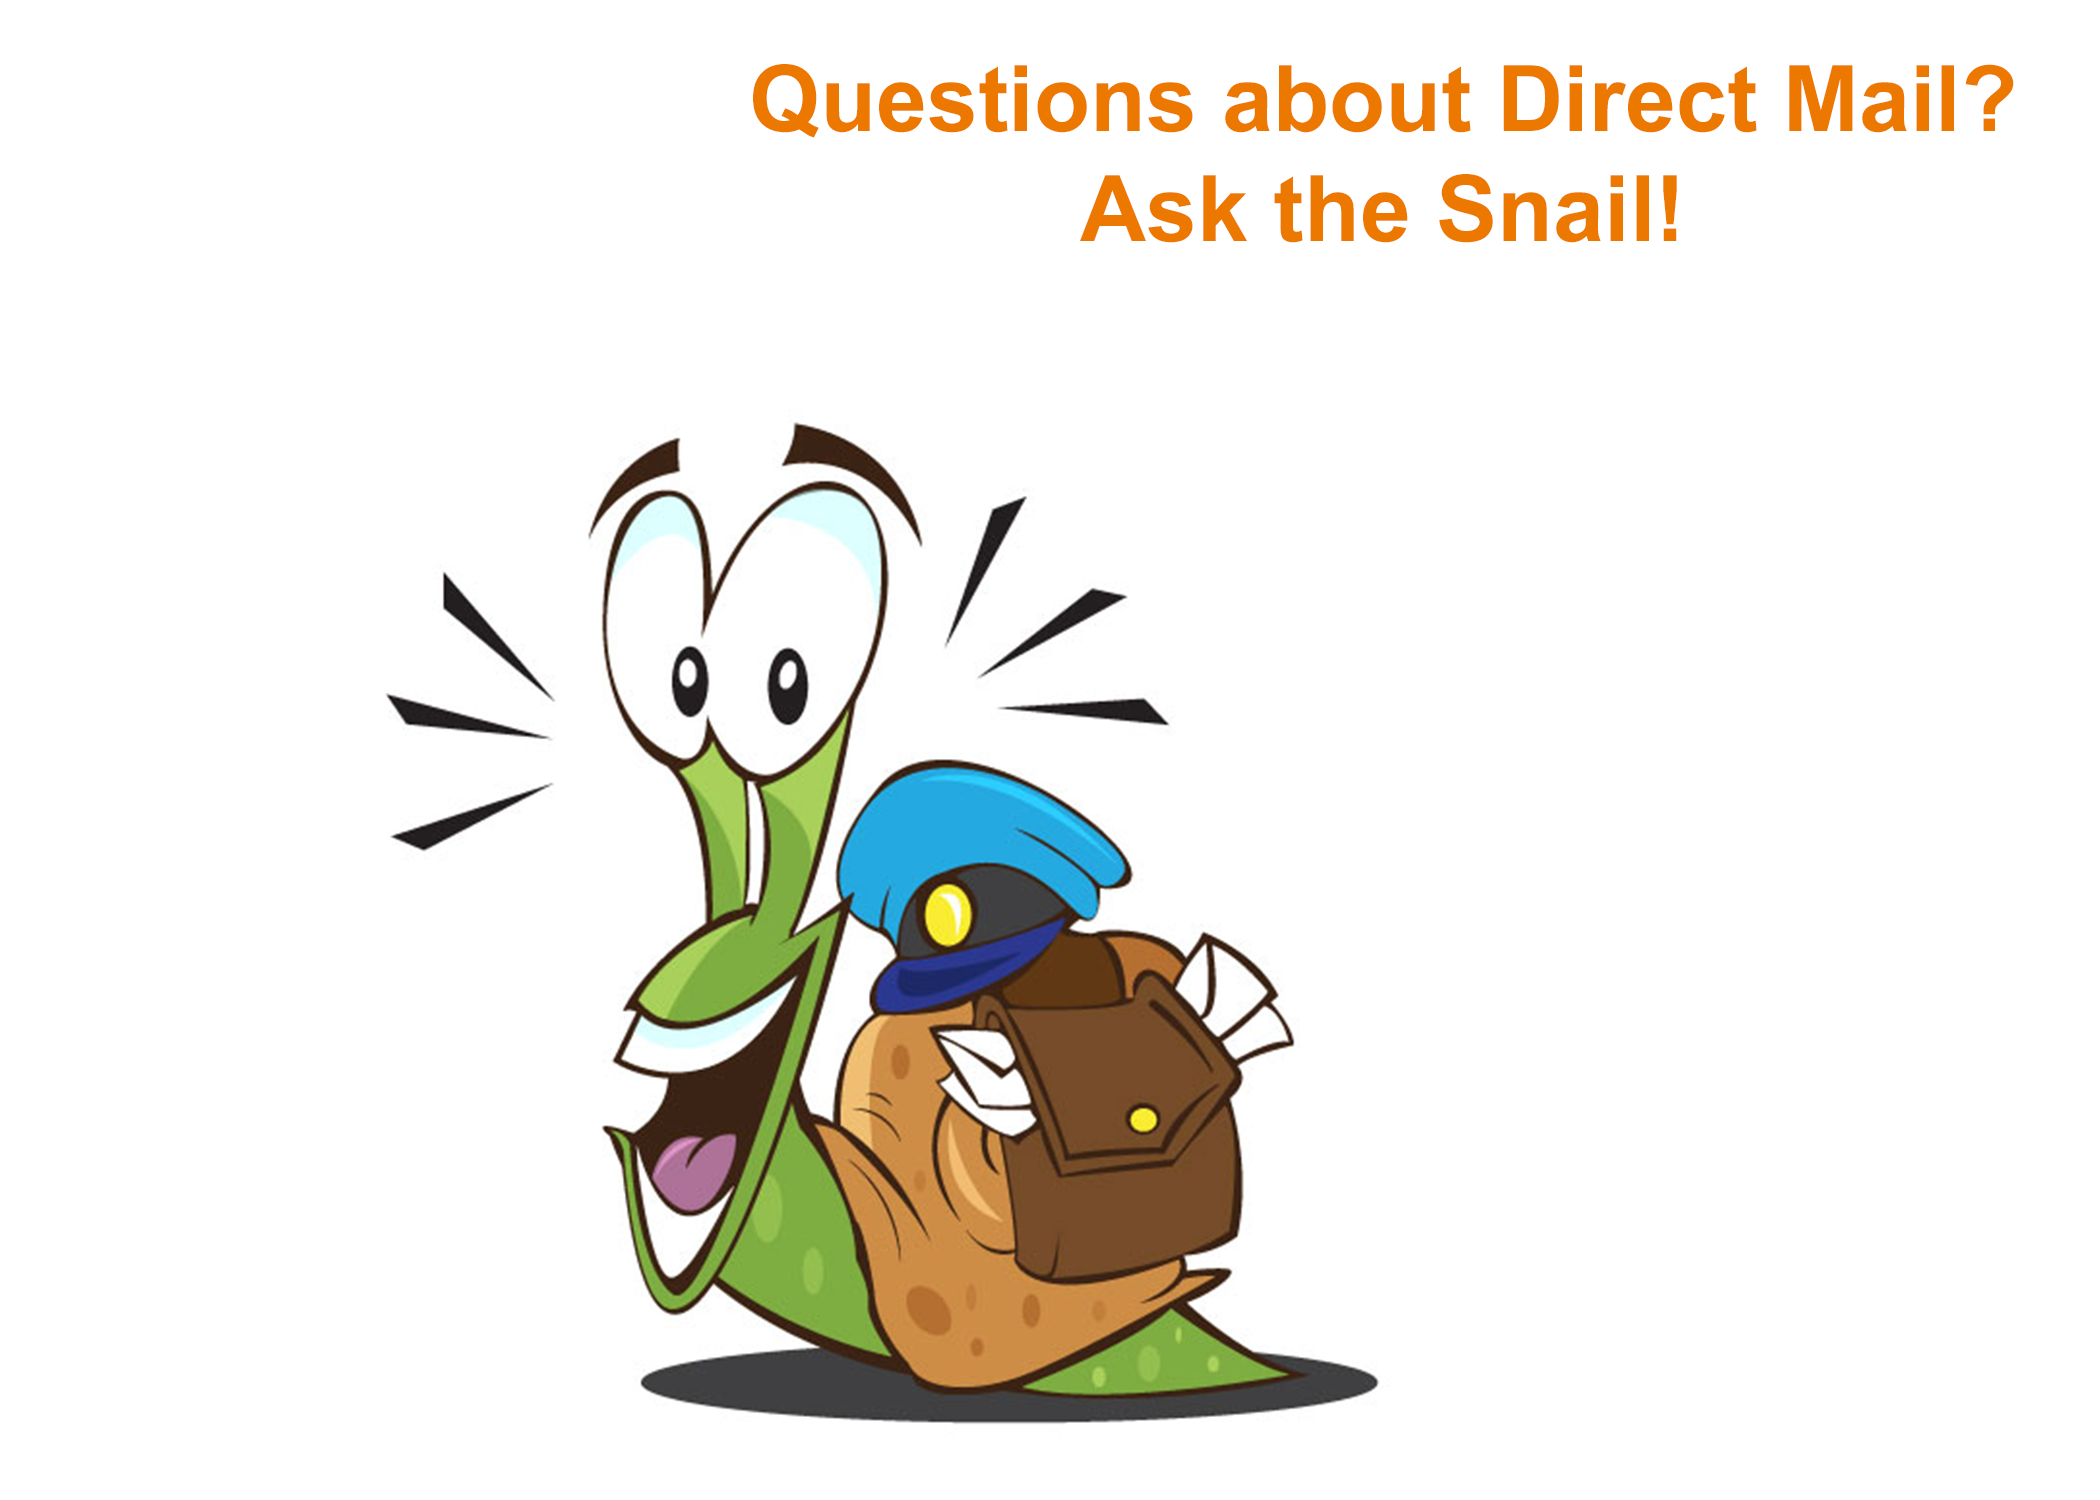 Ask the Snail! Puzzled in Pennsylvania